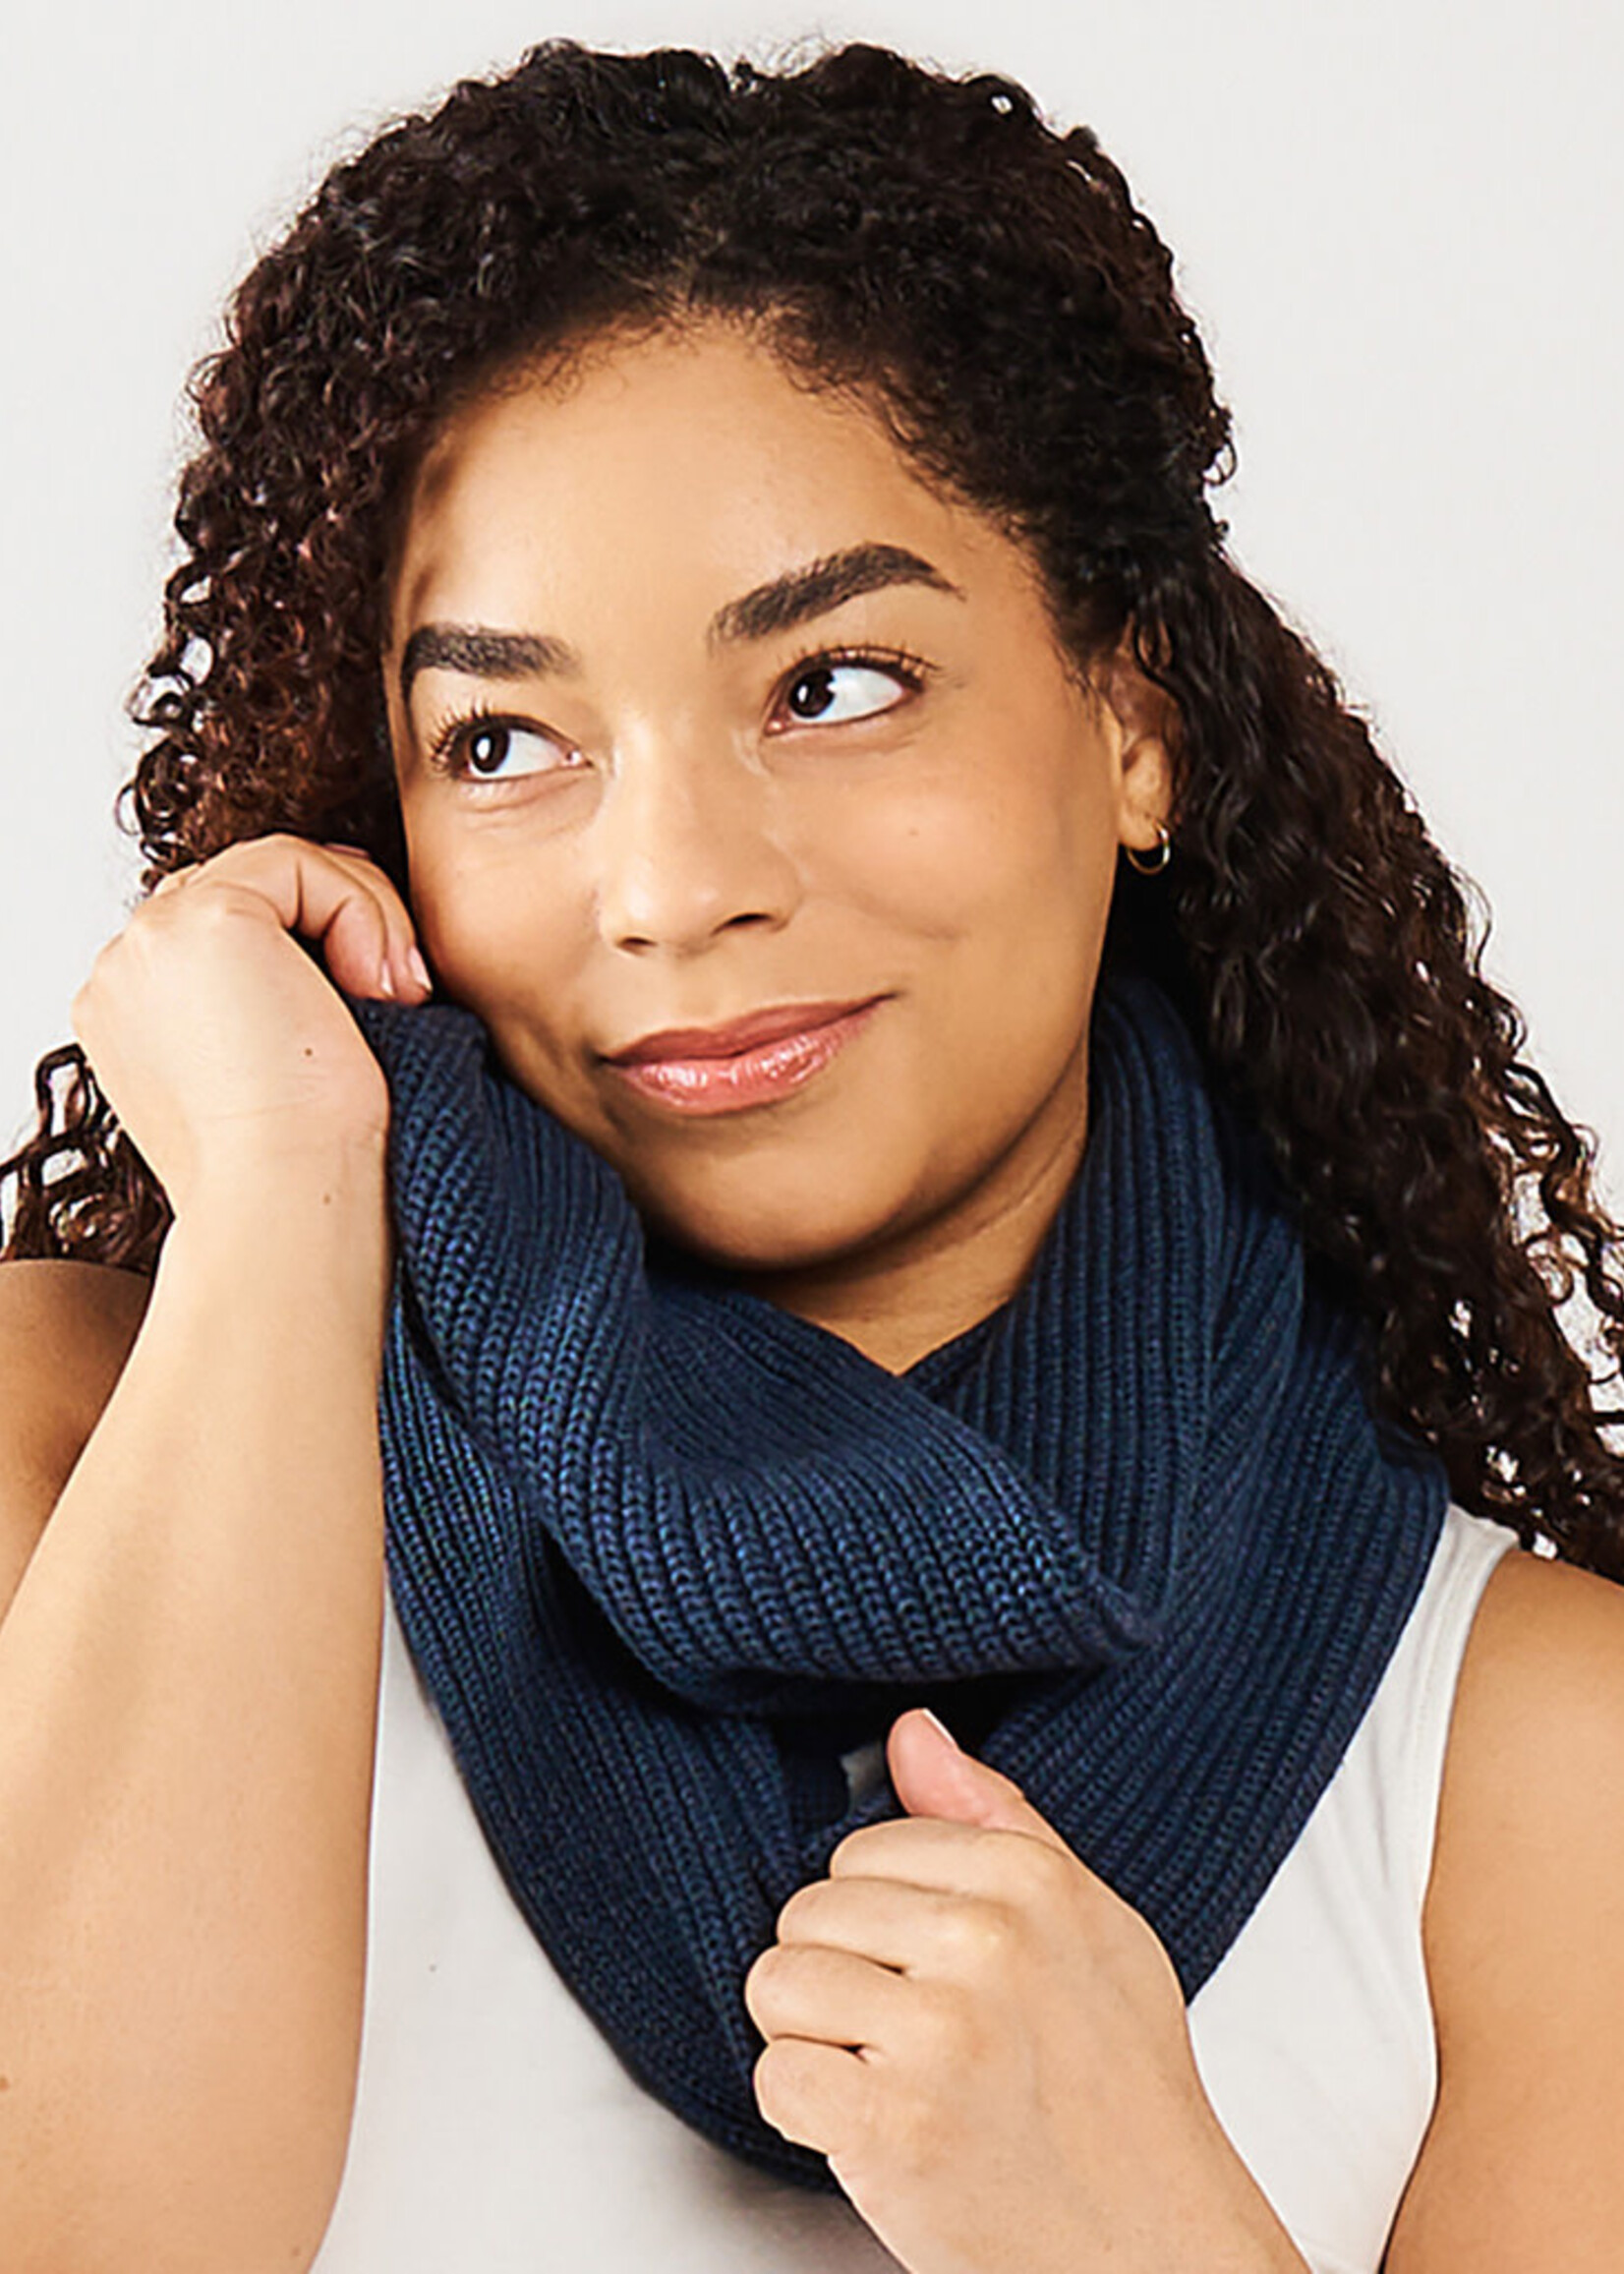 Cozy Knit Infinity Scarf from HumanKind Fair Trade - HumanKind Fair Trade